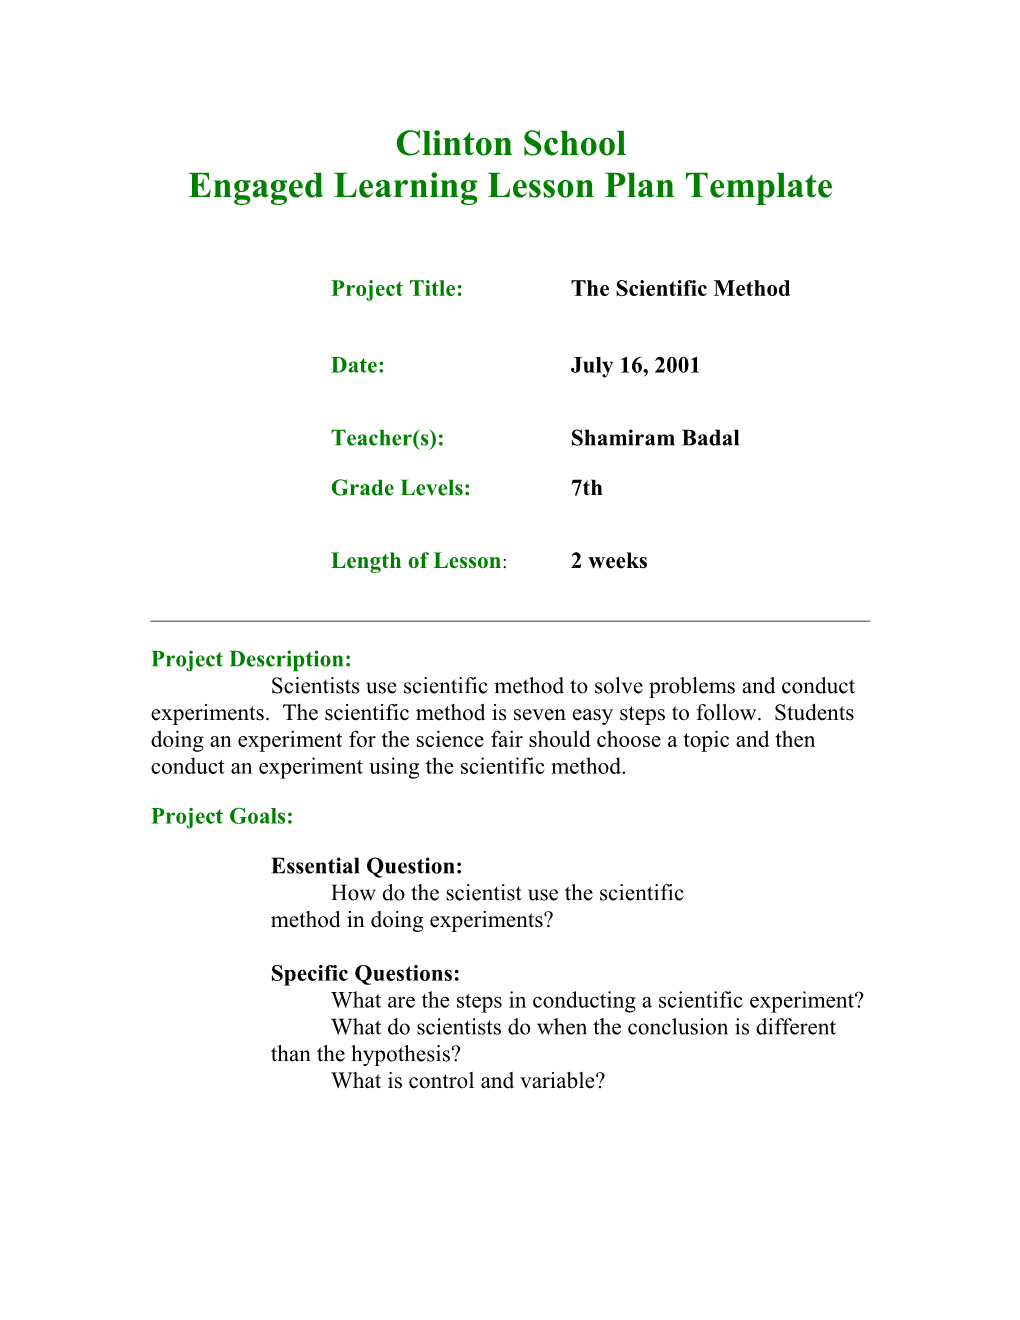 Engaged Learning Lesson Plan Template